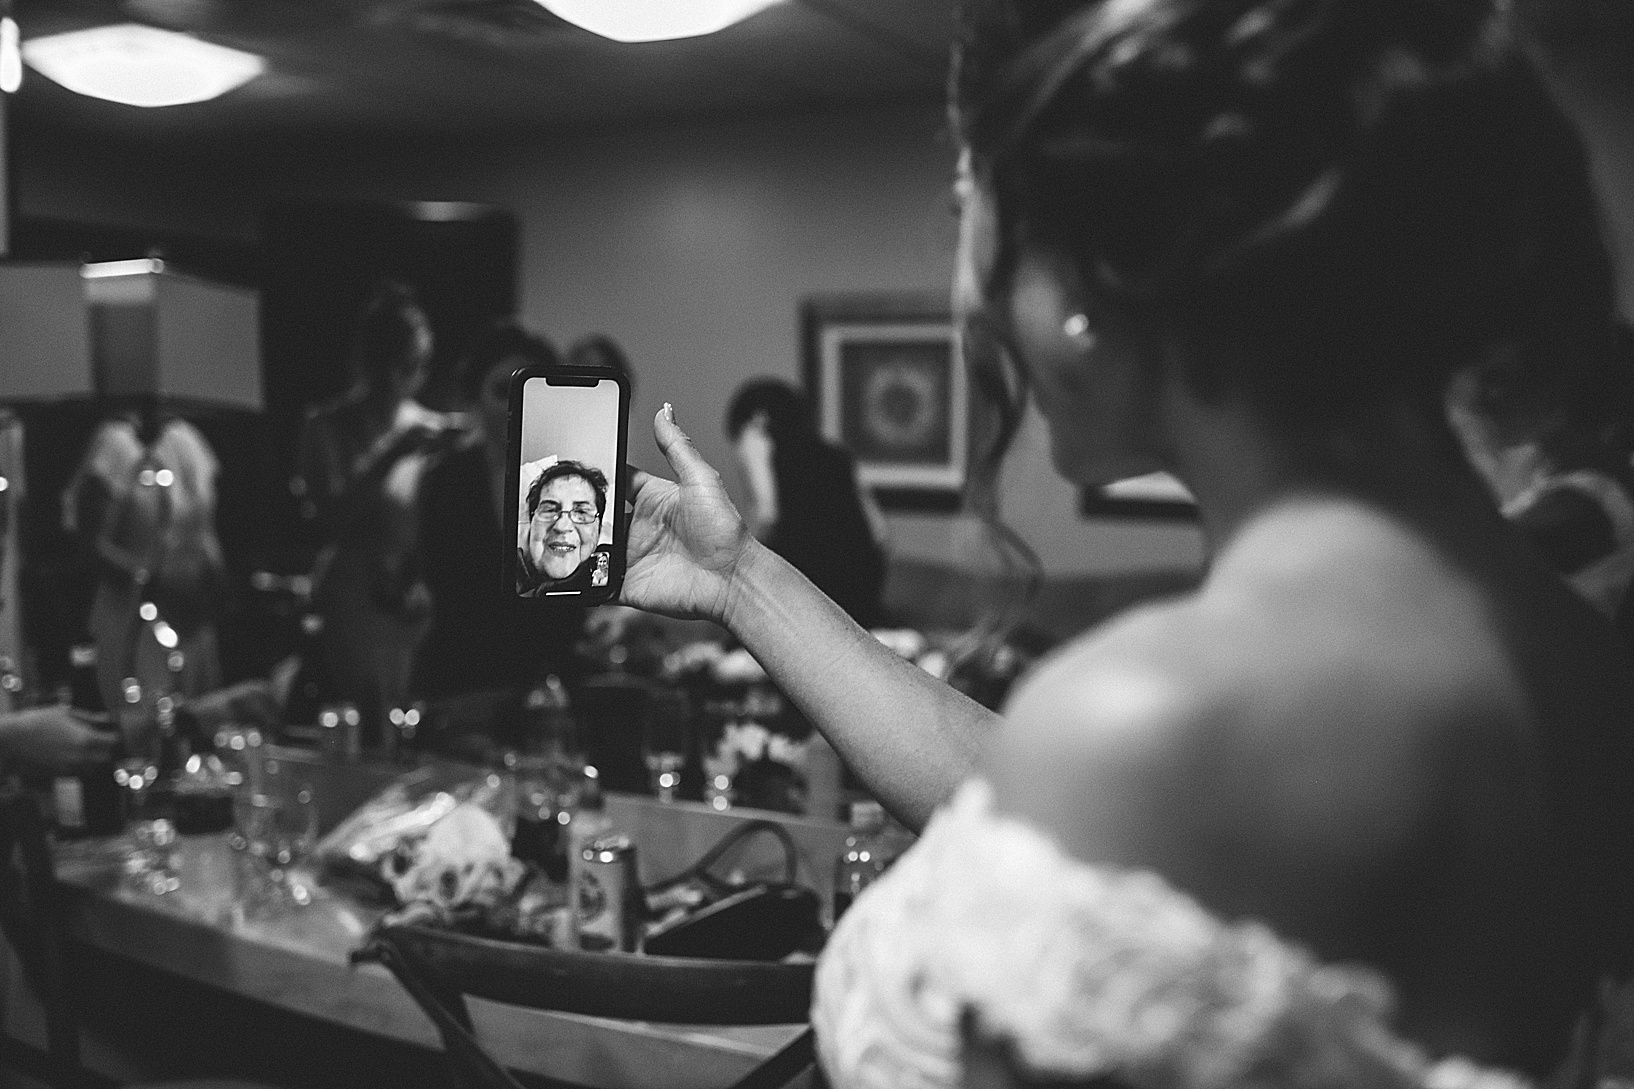 The bride facetiming with an older woman on an iphone in her wedding dress